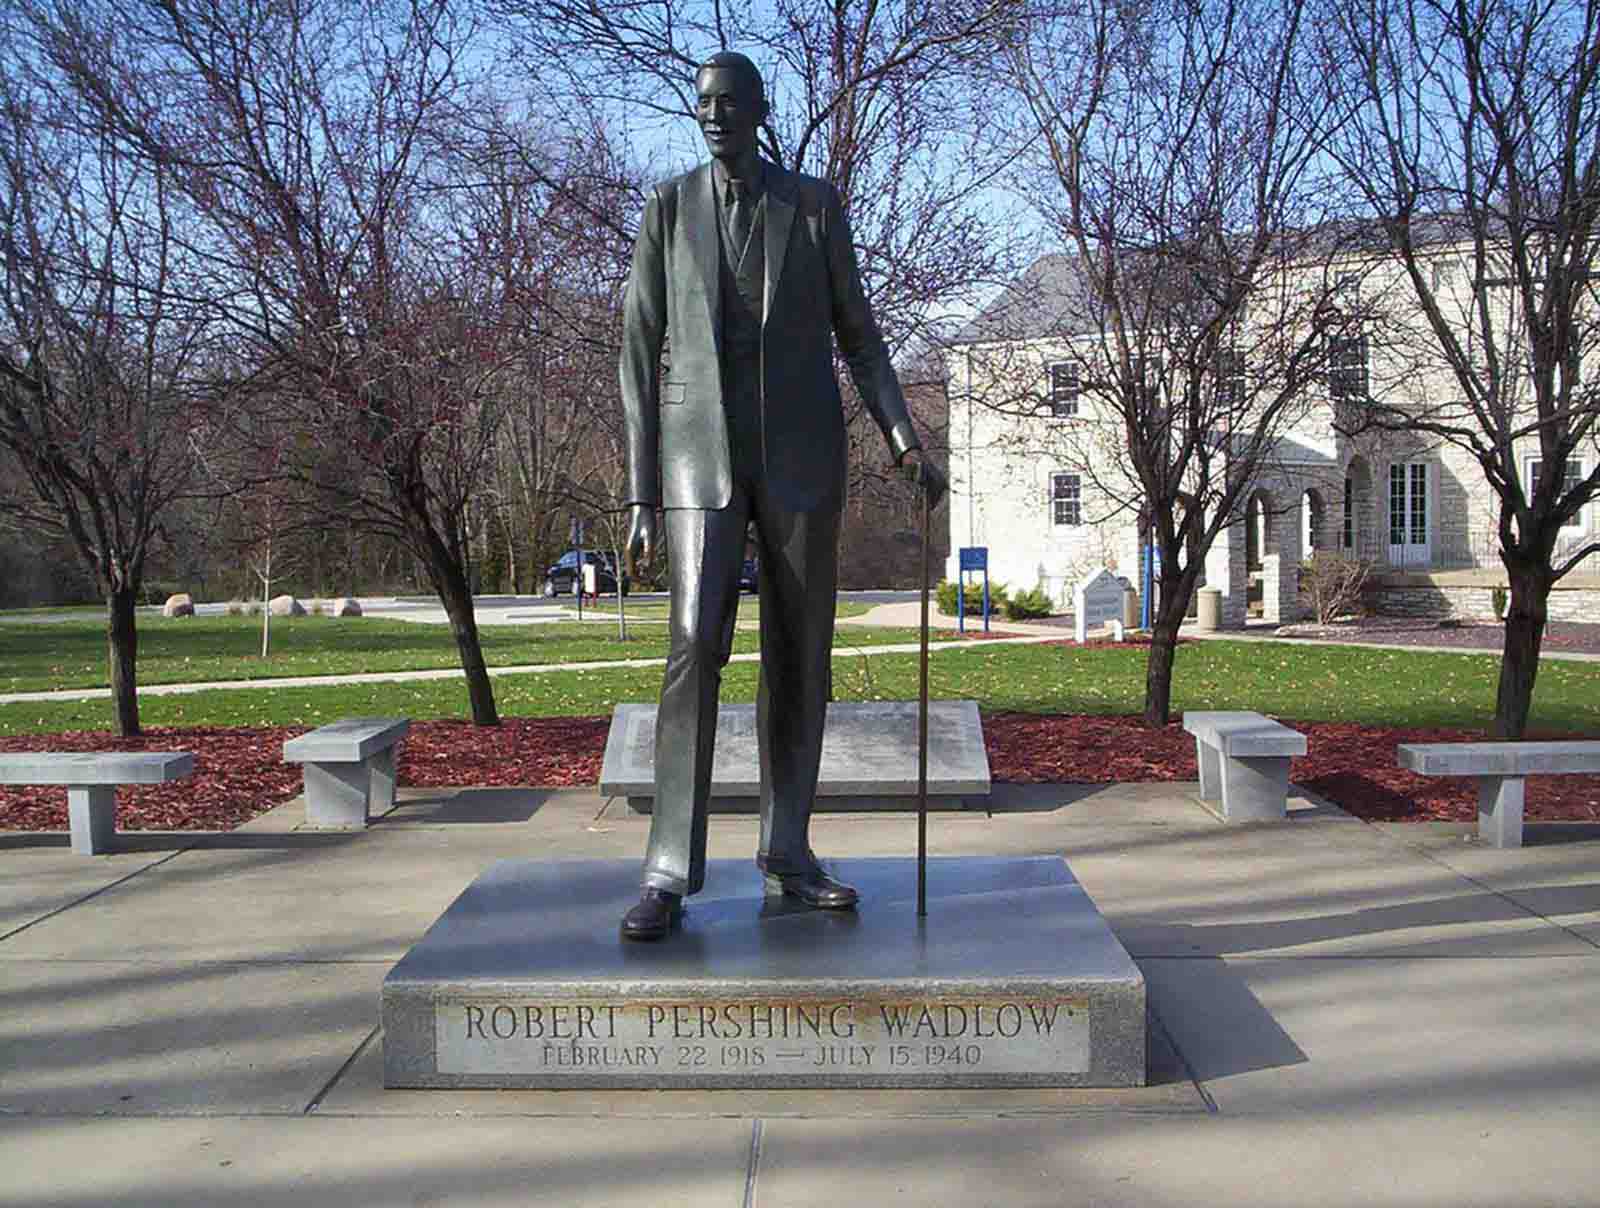 A life-size statue of Robert Wadlow stands in his hometown of Alton, Illinois.